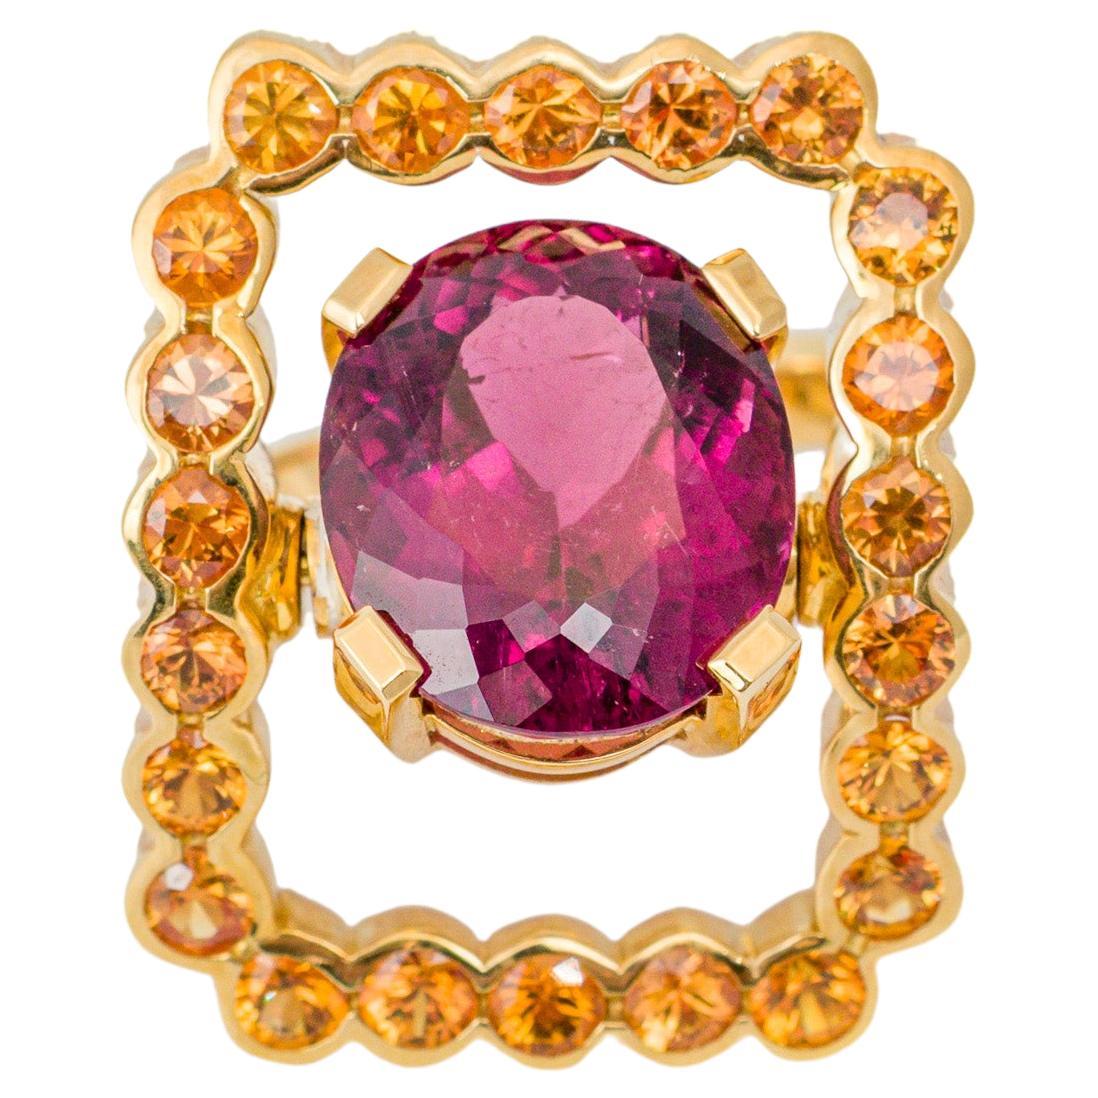 "Costis" Frame In Motion Ring with 9.10 crts Rubellite Tourmaline and Sapphires For Sale